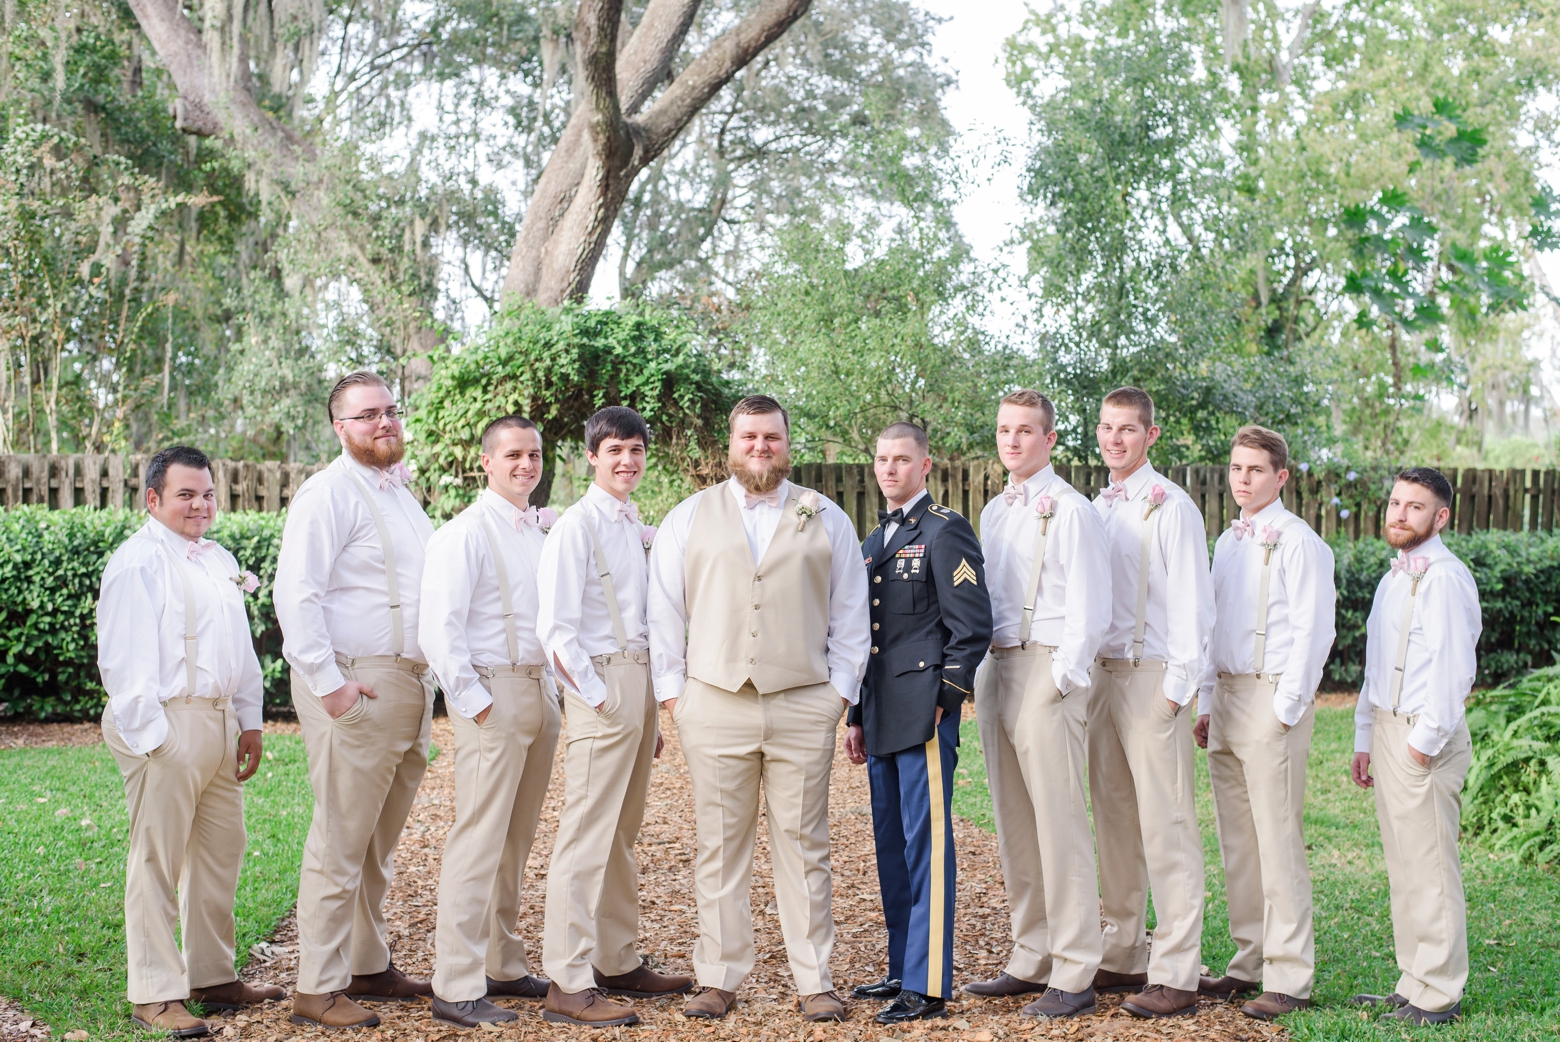 Groom and his Groomsmen pose in a line under the oak trees